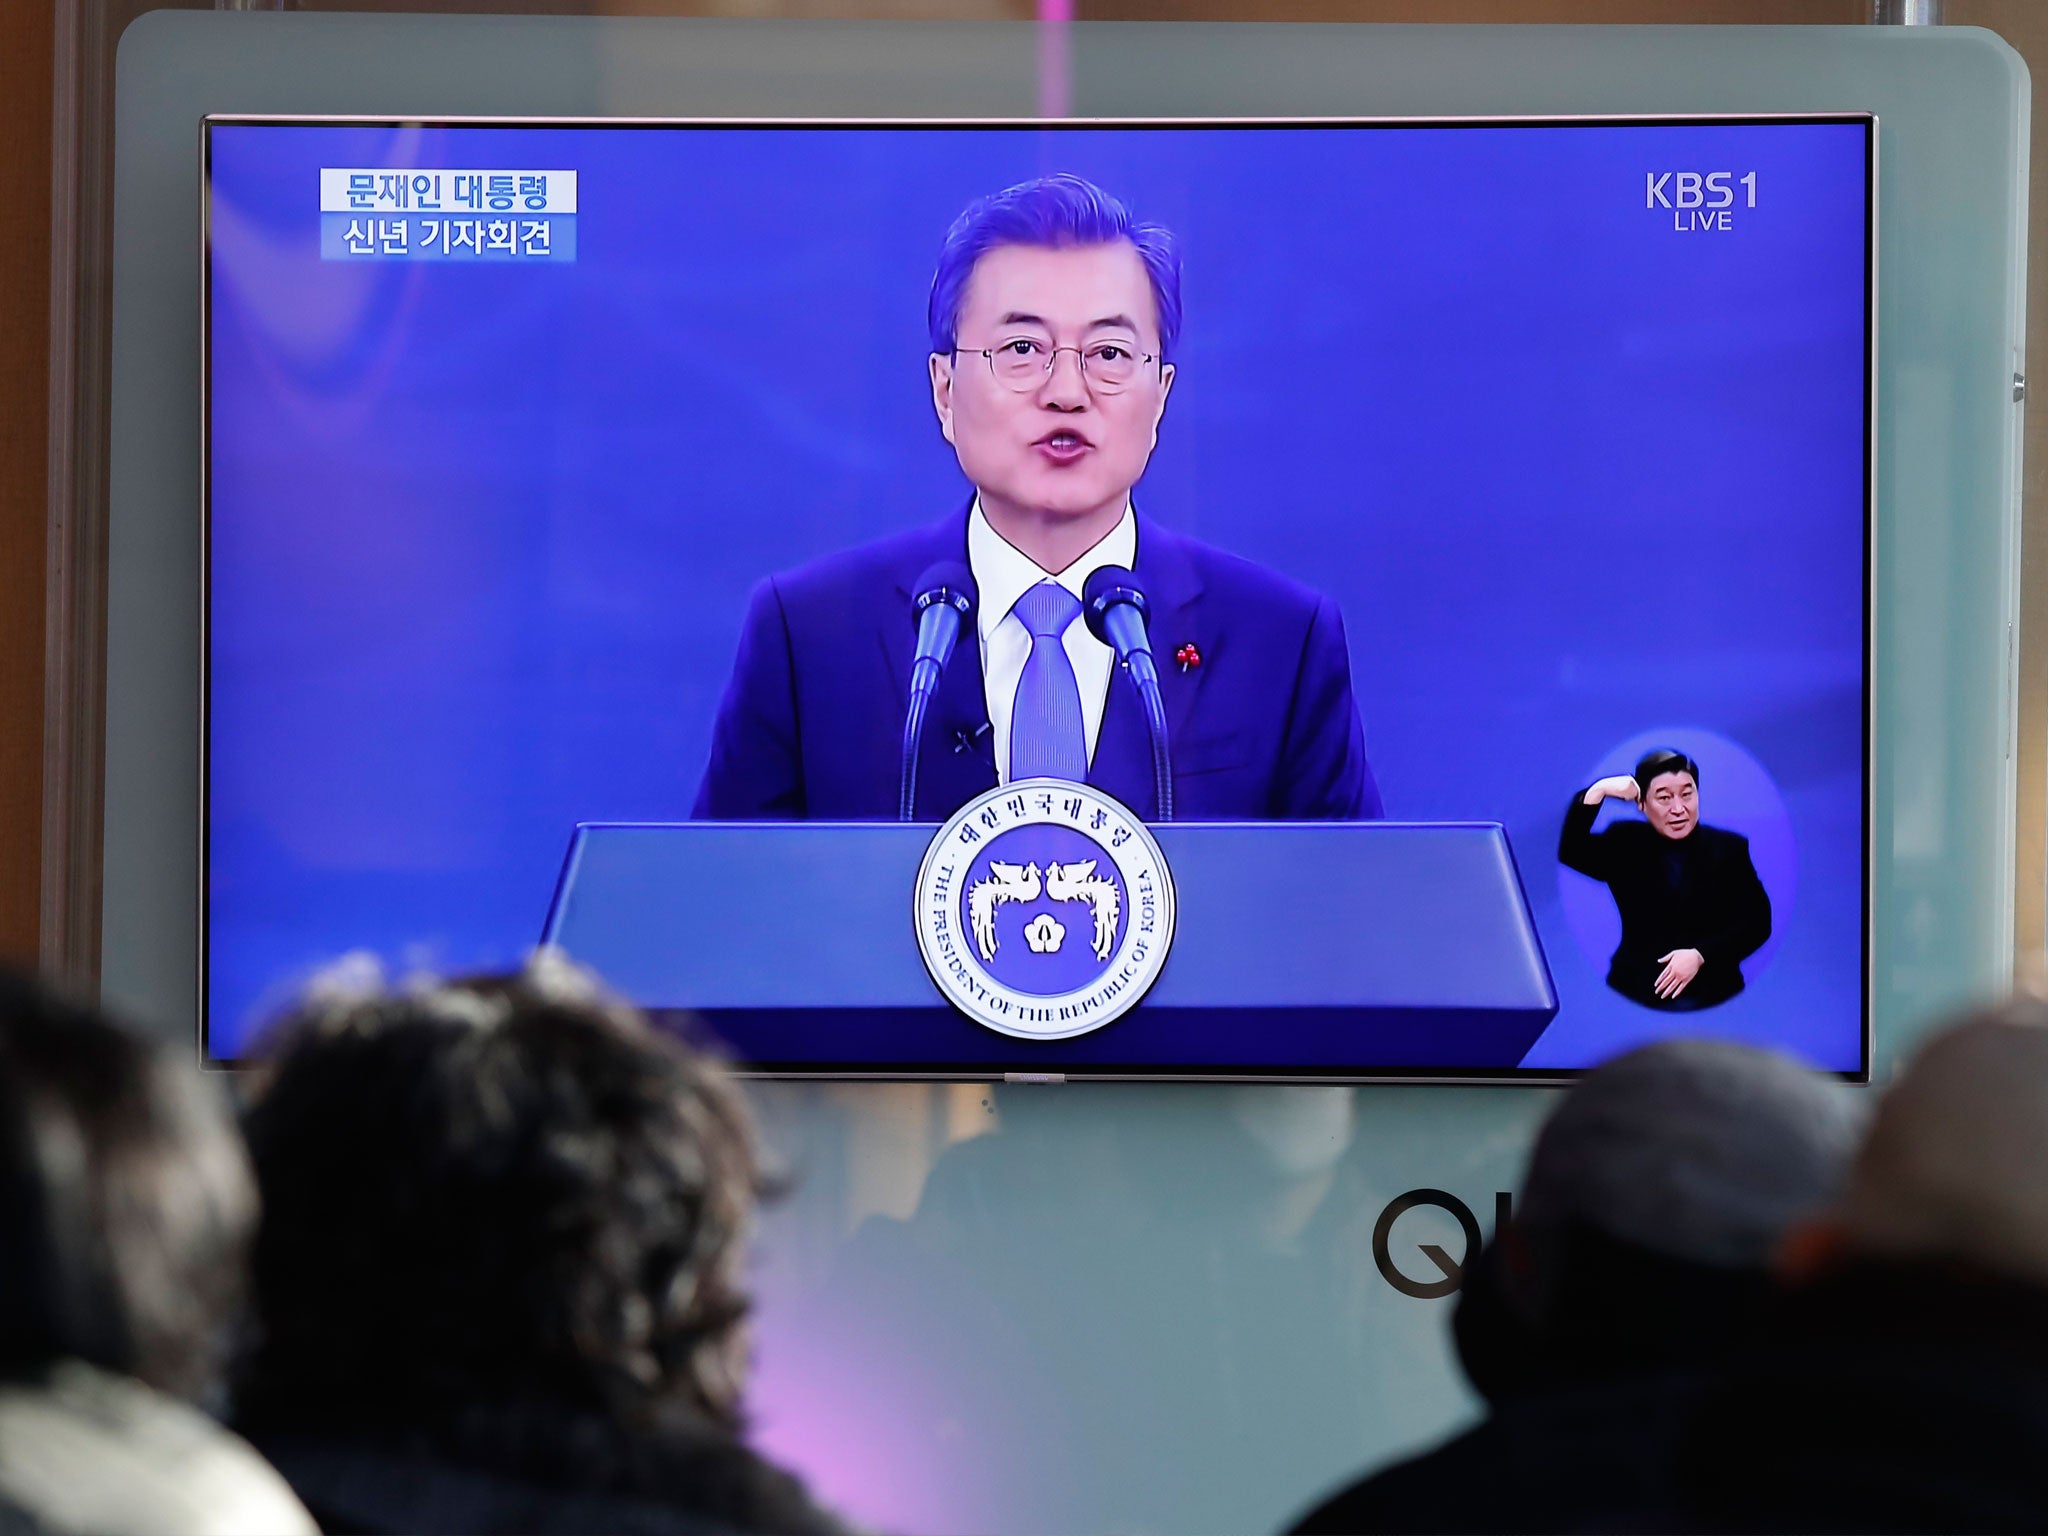 South Korean President Moon Jae-In's New Year's press conference in Seoul promised fresh dialogue with the North